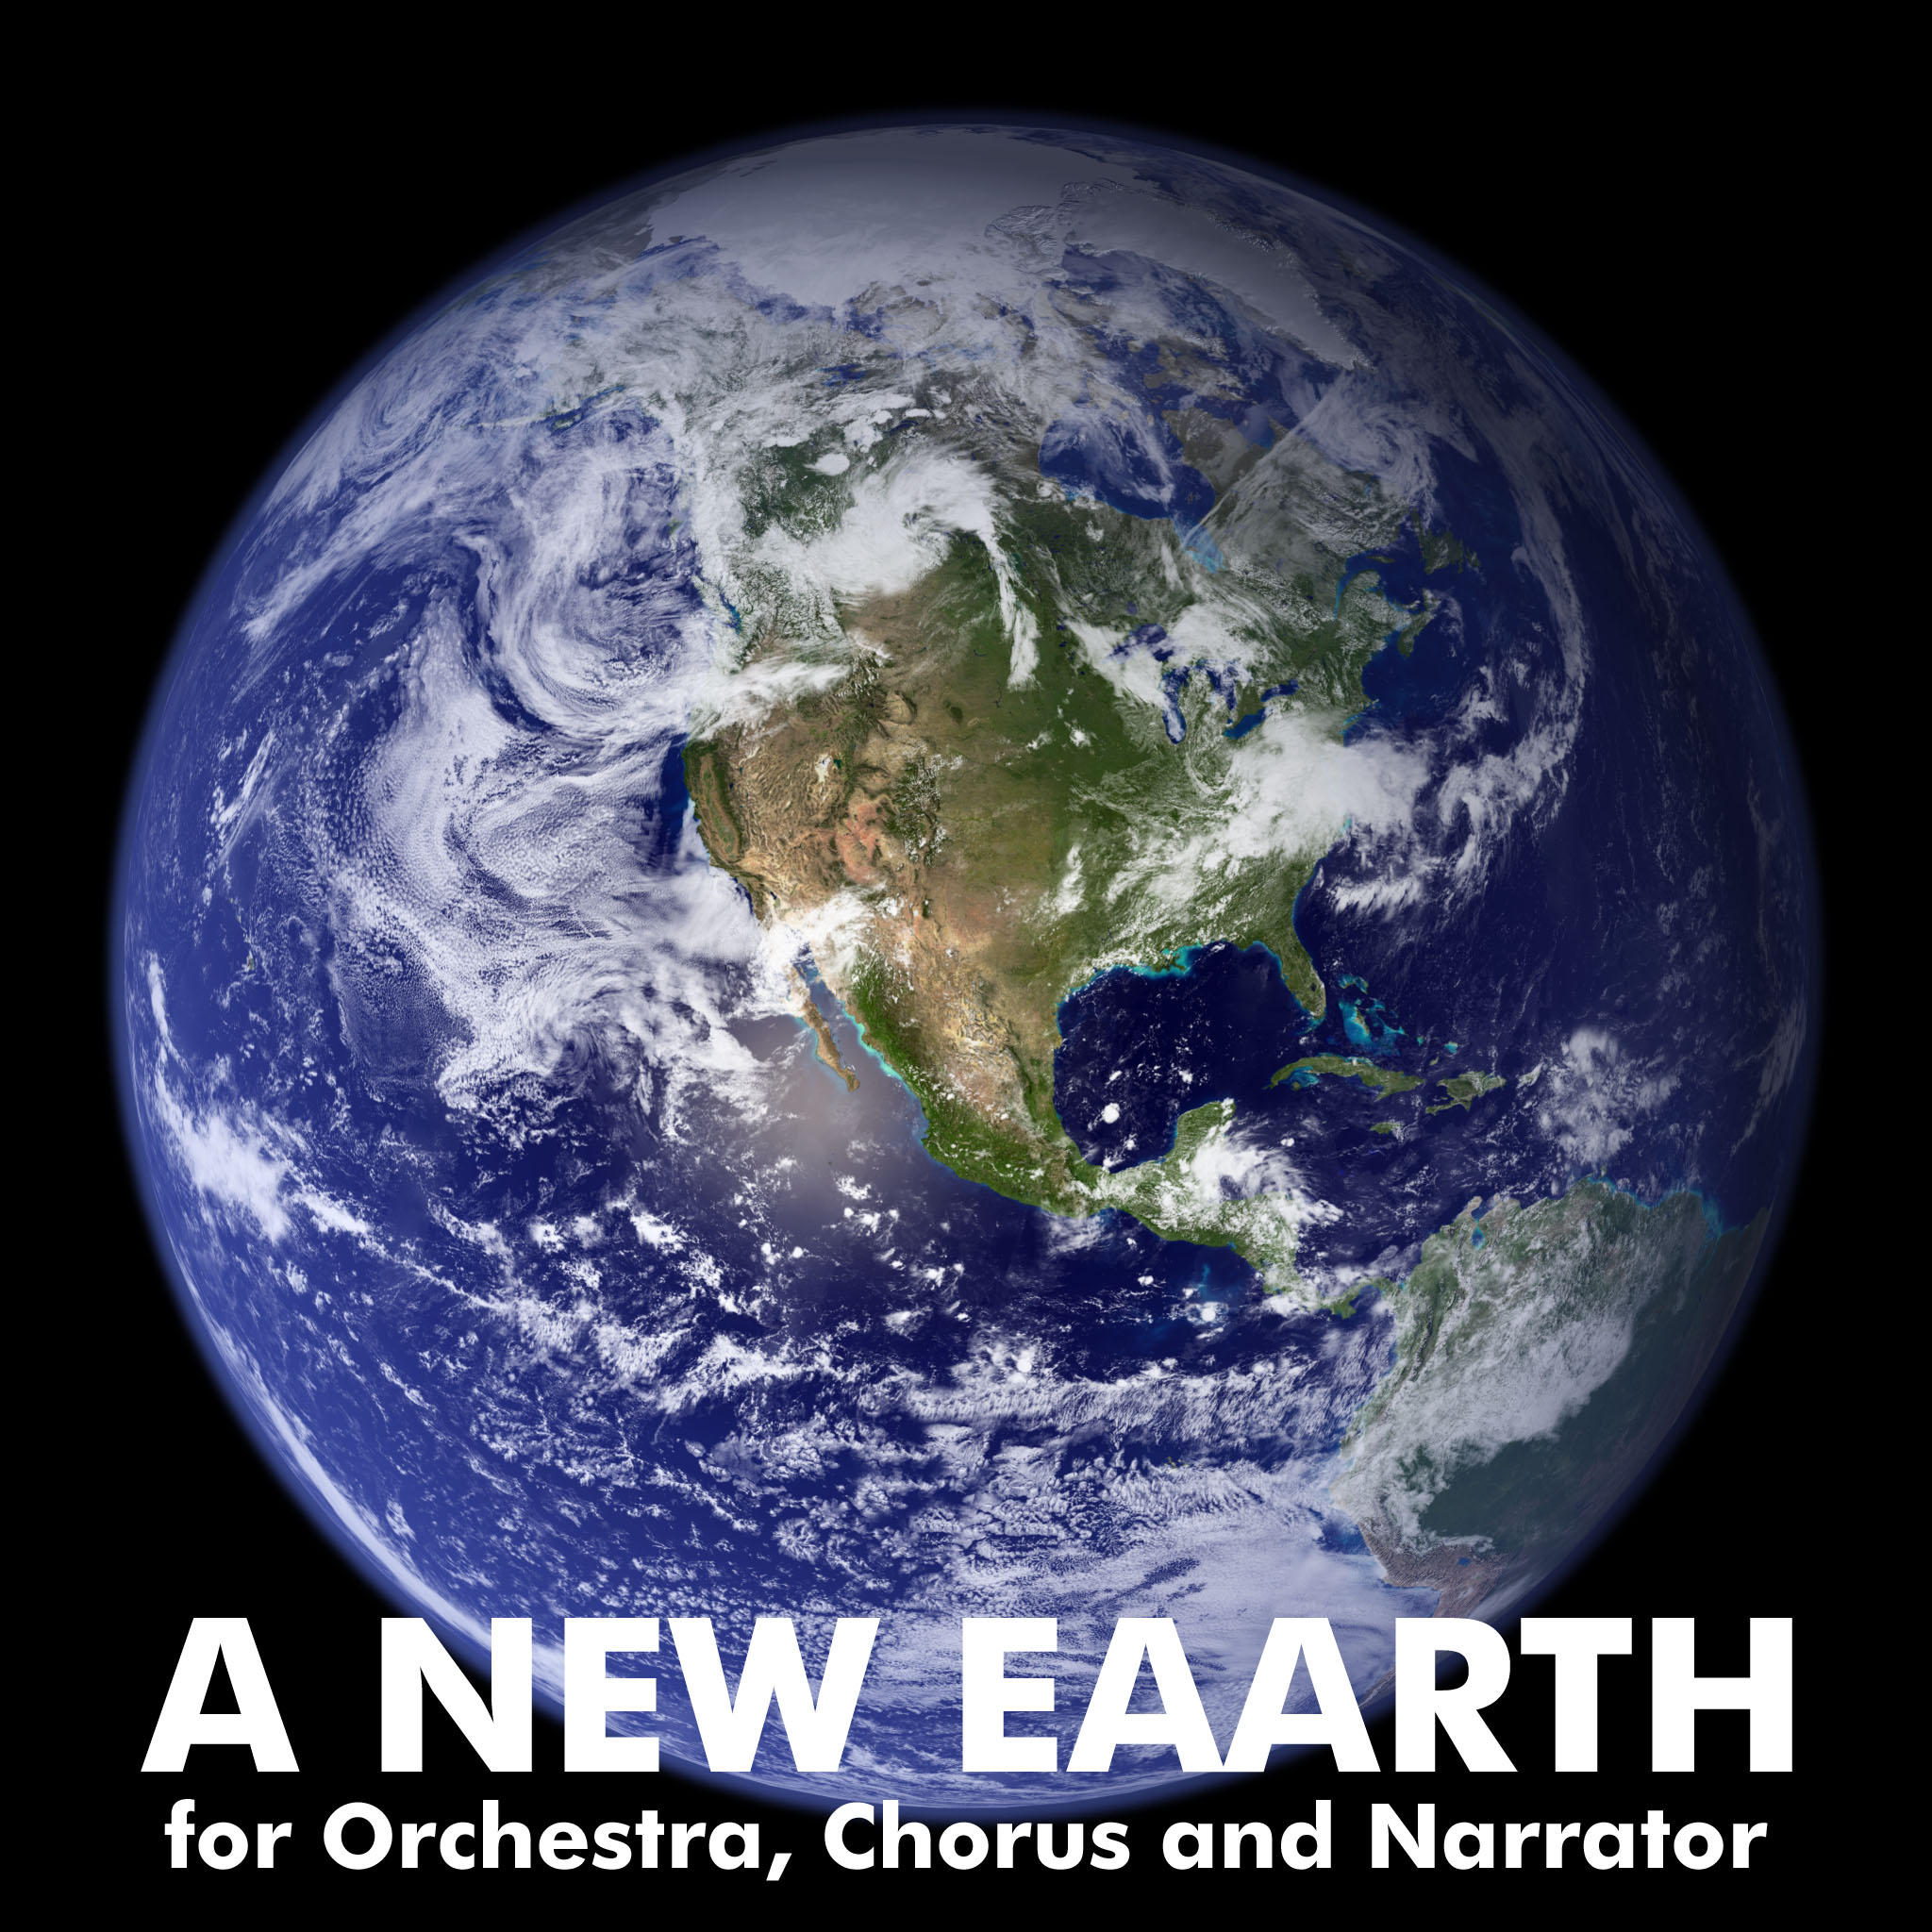 A New Eaarth  - for Orchestra, Chorus and Narrator